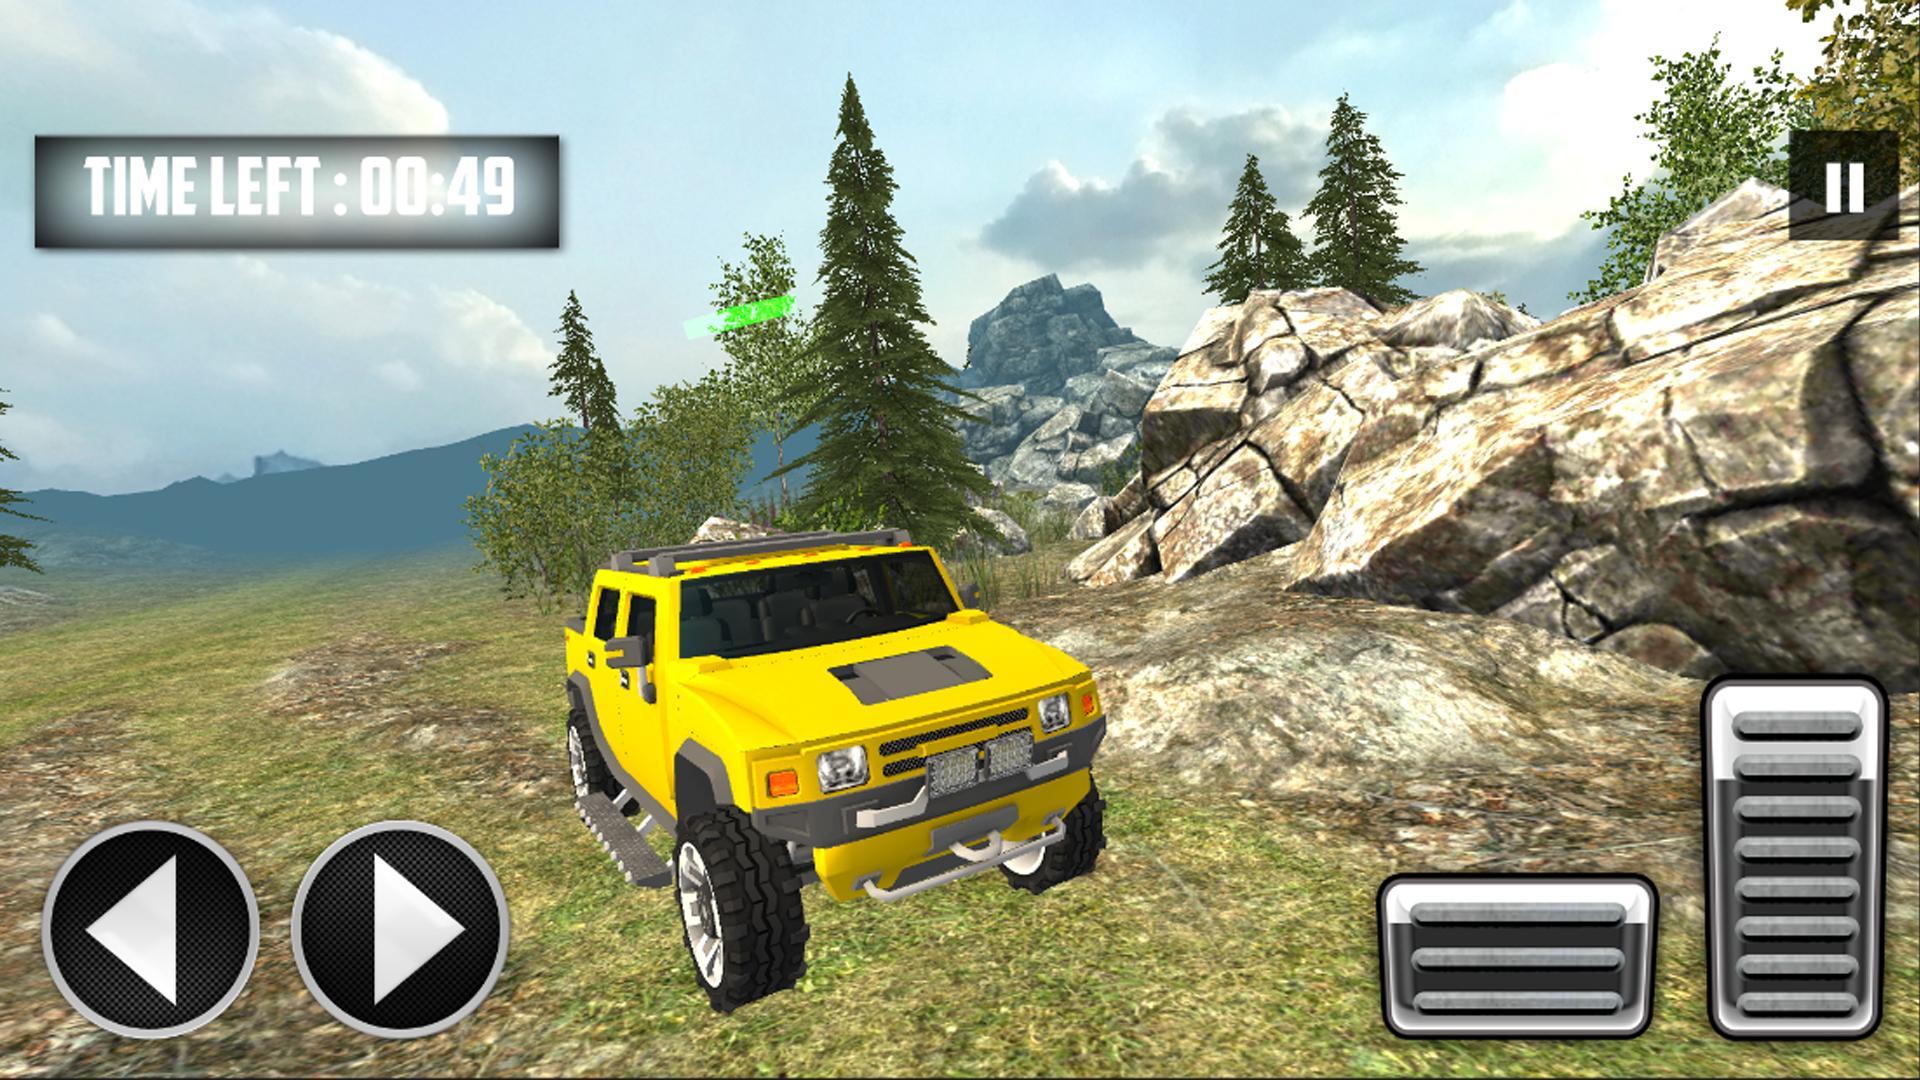 H1 Hummer Suv Off Road Driving Simulator Game Free For Android Apk Download - vehicle simulator roblox off road vehicles png download